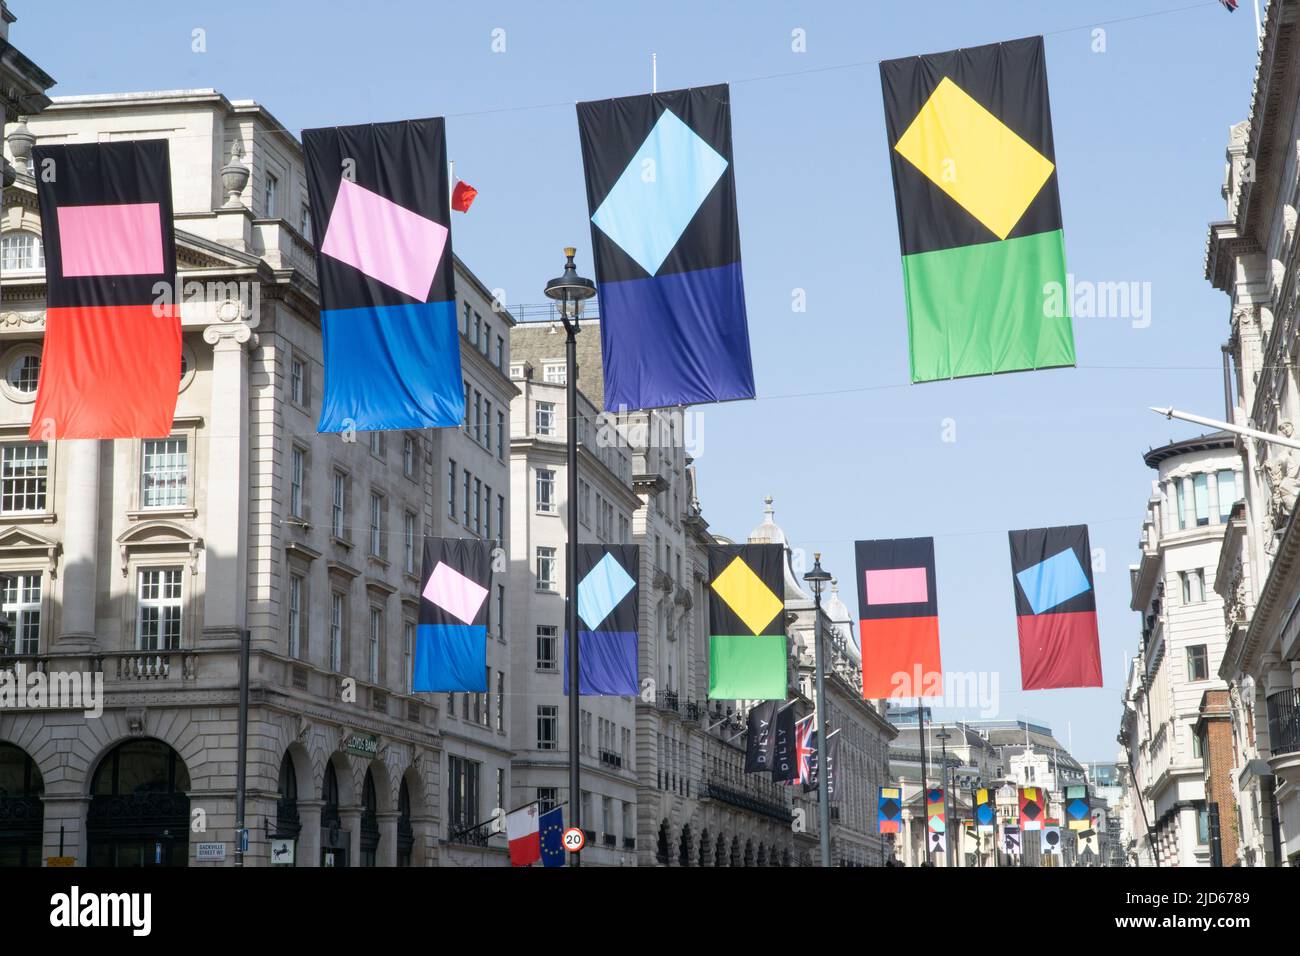 London, UK, 17 June 2021: To coincide with the Royal Academy's annual Summer Exhibition, flags with designs by artist Paul Huxley RA are suspended above Piccadilly in Mayfair. Anna Watson/Alamy Live News Stock Photo